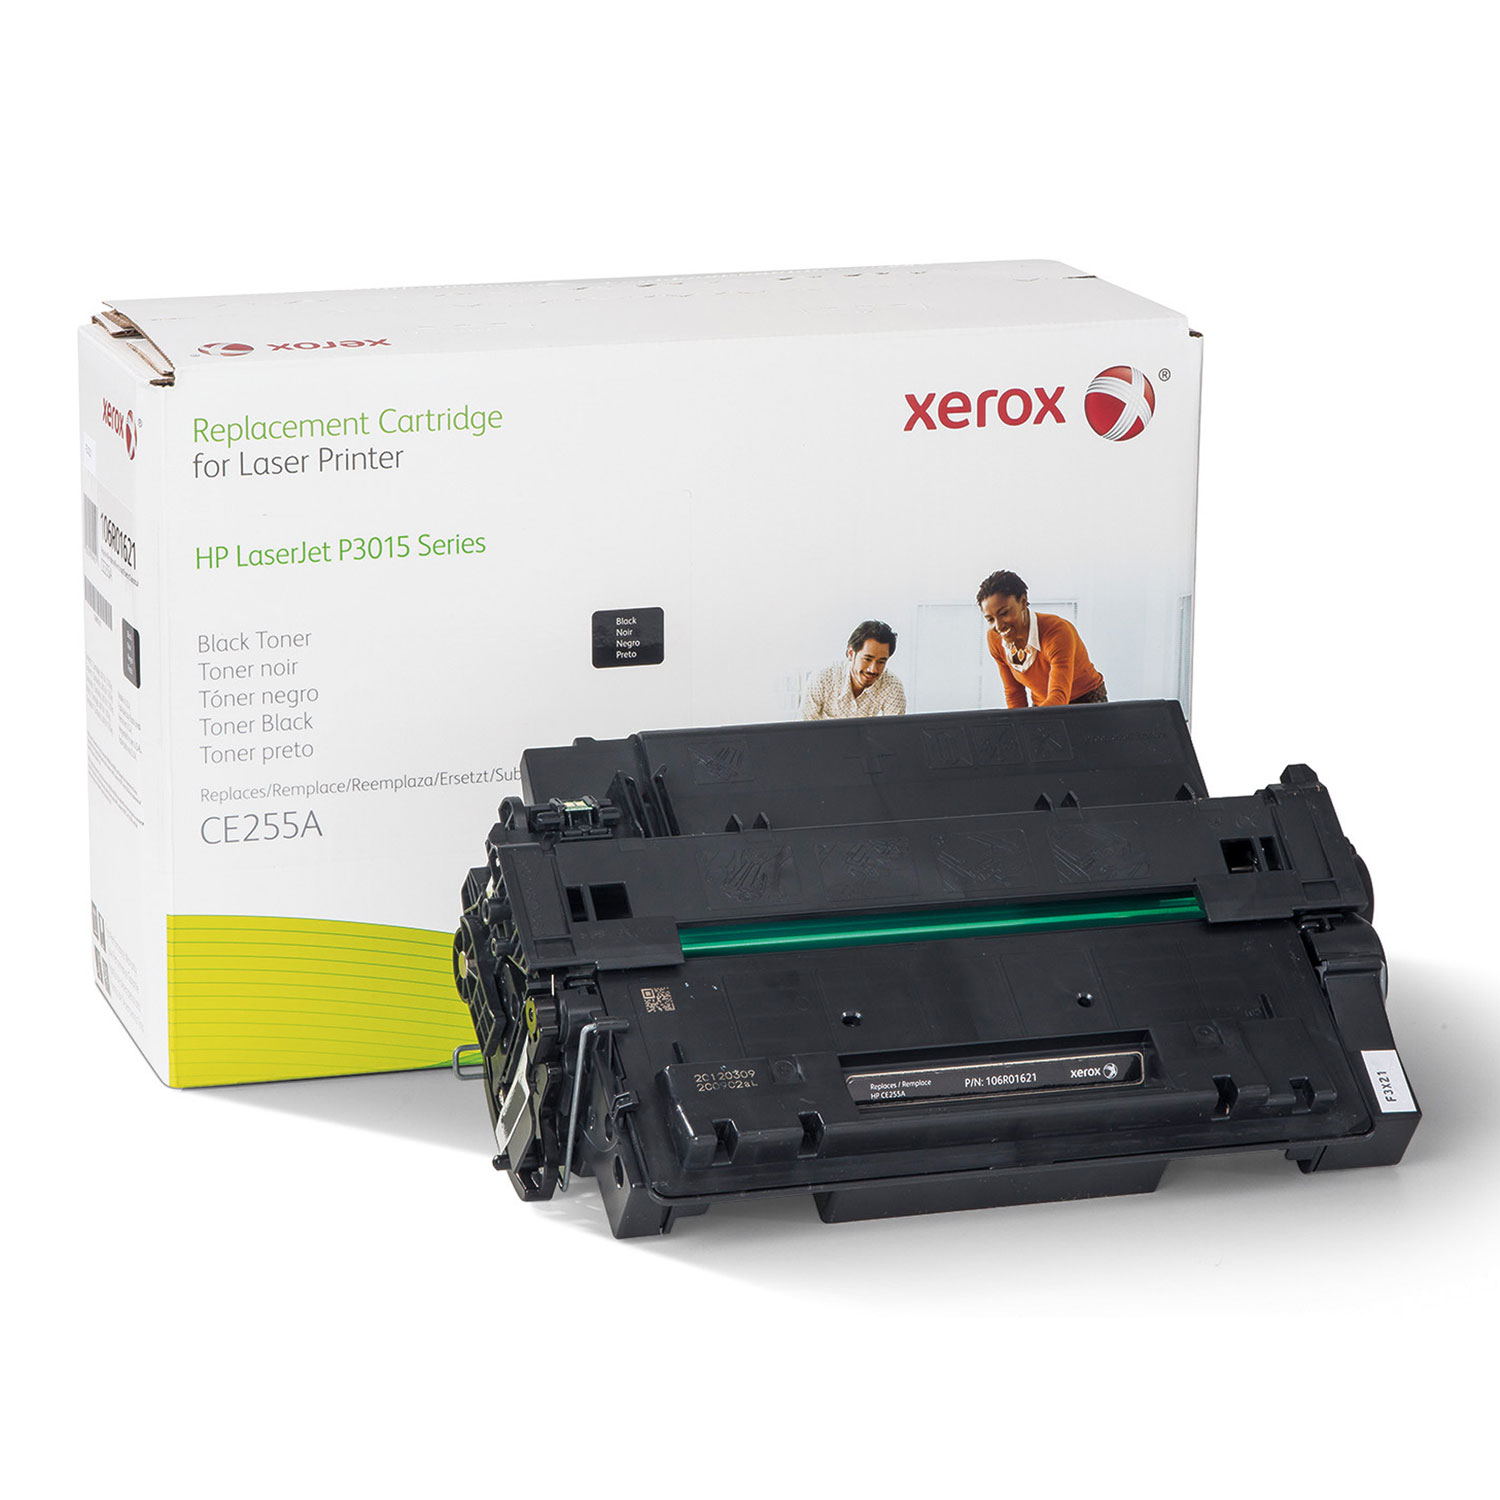  Xerox 106R01621 106R01621 Replacement Toner for CE255A (55A), 8200 Page Yield, Black (XER106R01621) 